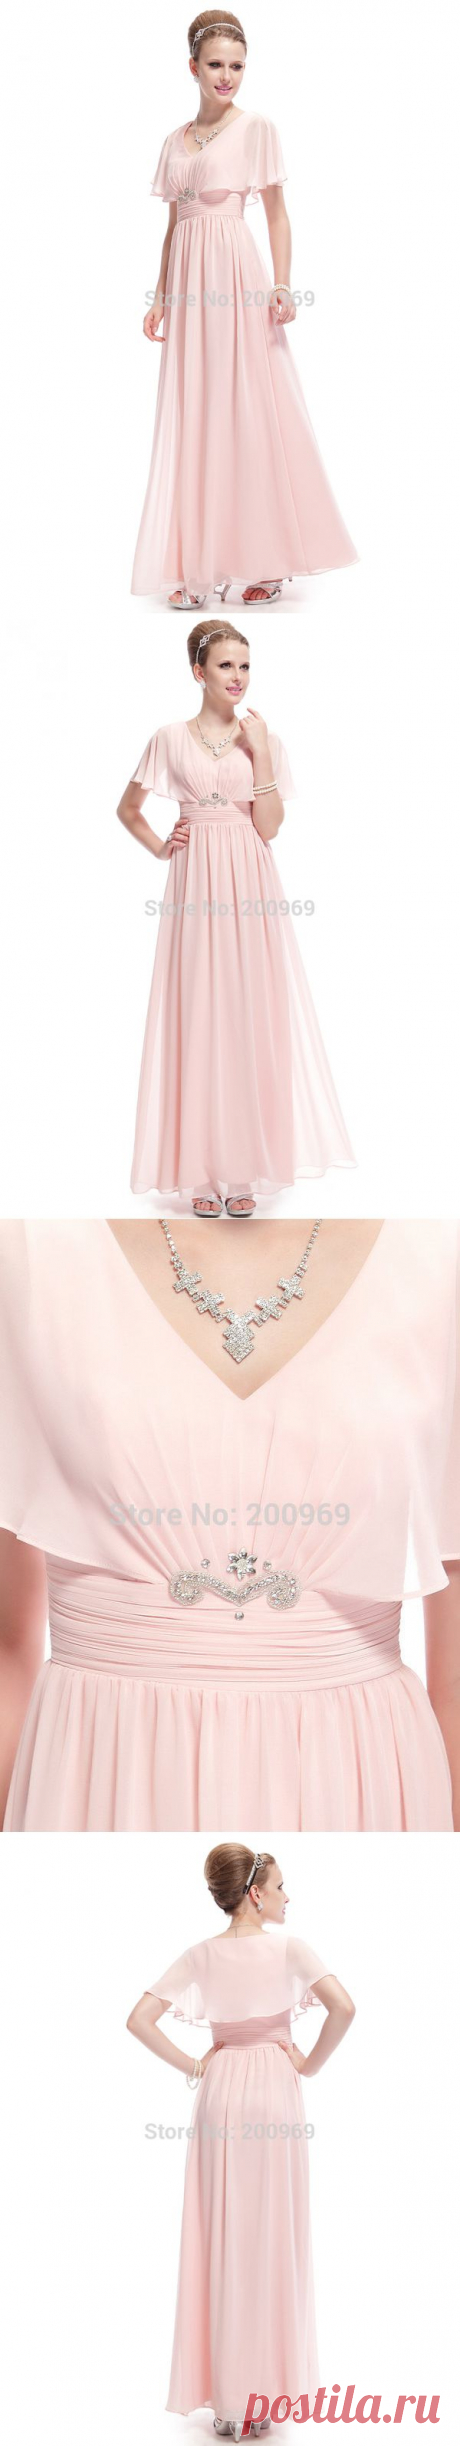 party dresses for little girls Picture - More Detailed Picture about Party Dresses Ever Pretty 8096 Elegant Pink Sexy Capelet Chiffon RuchMaxi Women Celebrity Wedding Winter Event Formal Prom 2015 Picture in Prom Dresses from Ever Pretty's store | Aliexpress.com | Alibaba Group